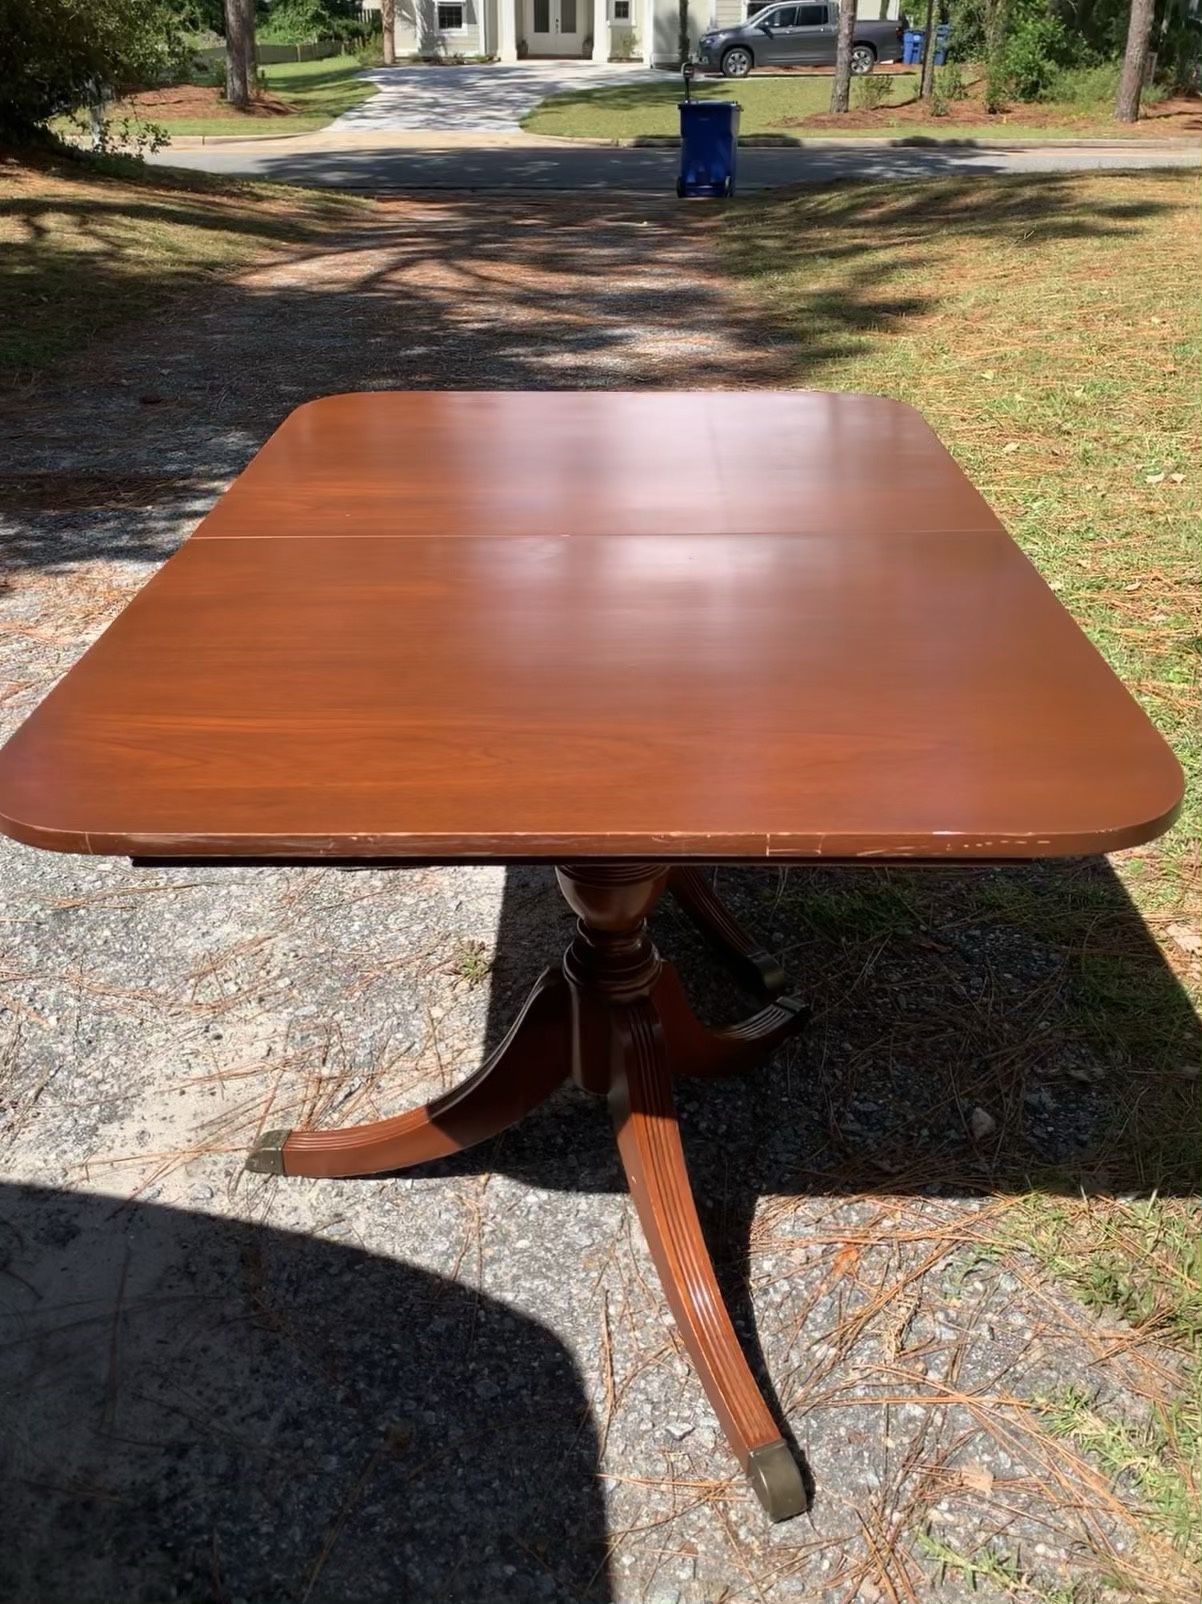 Dining table double pedestal  REDUCED  $125